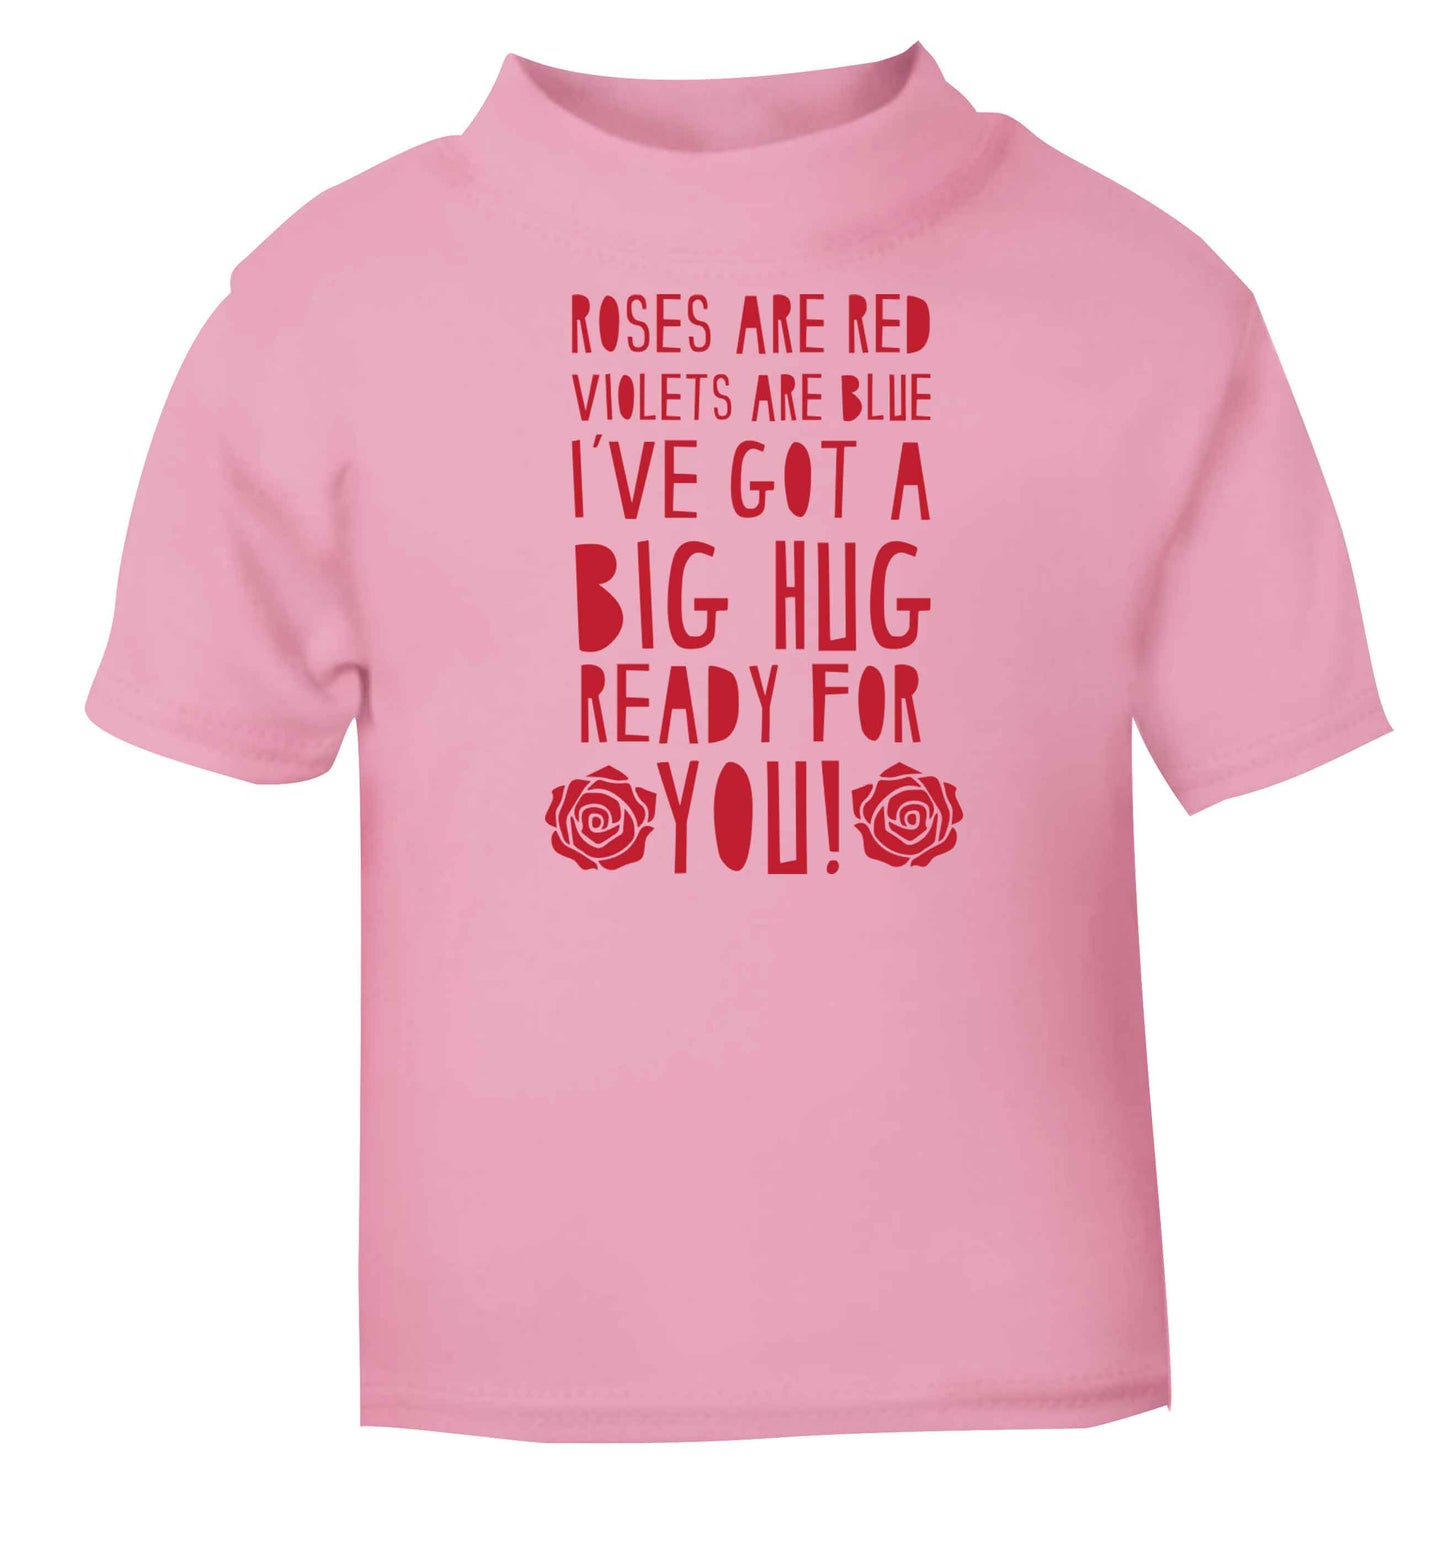 Roses are red violets are blue I've got a big hug coming for you light pink baby toddler Tshirt 2 Years